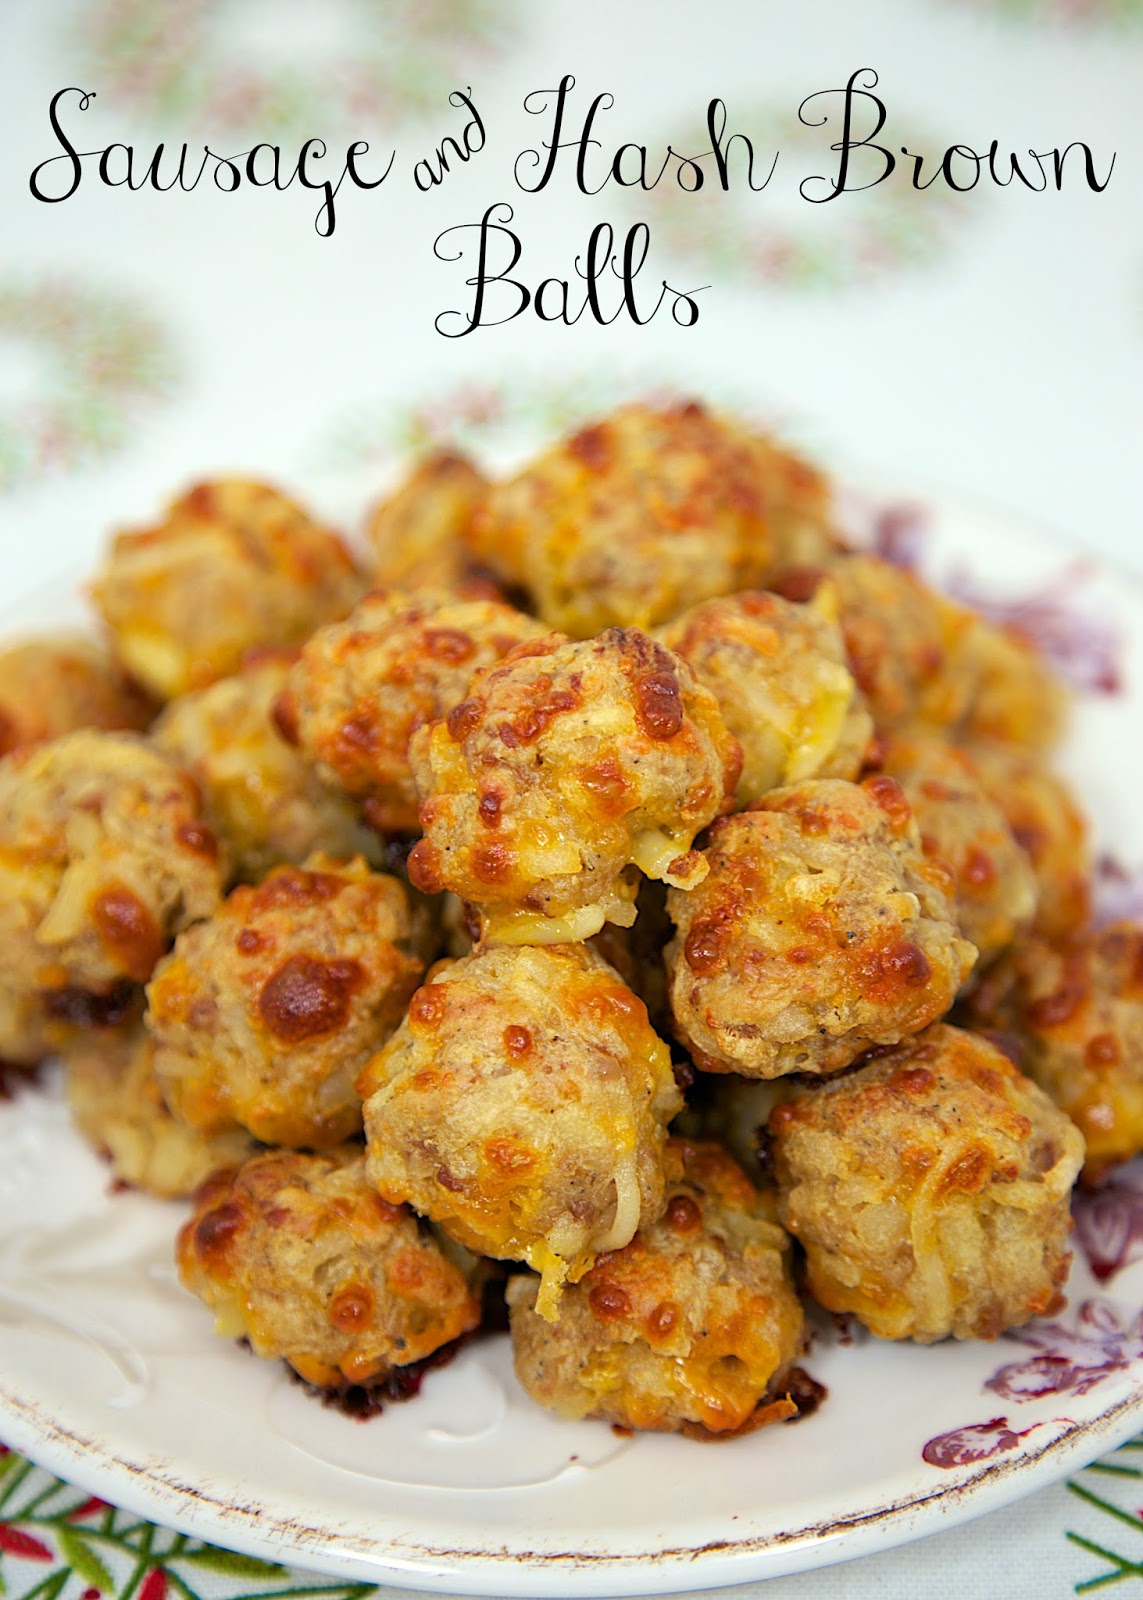 Sausage & Hash Brown Balls - mix together and freezer for a quick snack. Always a HUGE HIT! Can freeze for later. Great for breakfast or at parties. There are never any left!